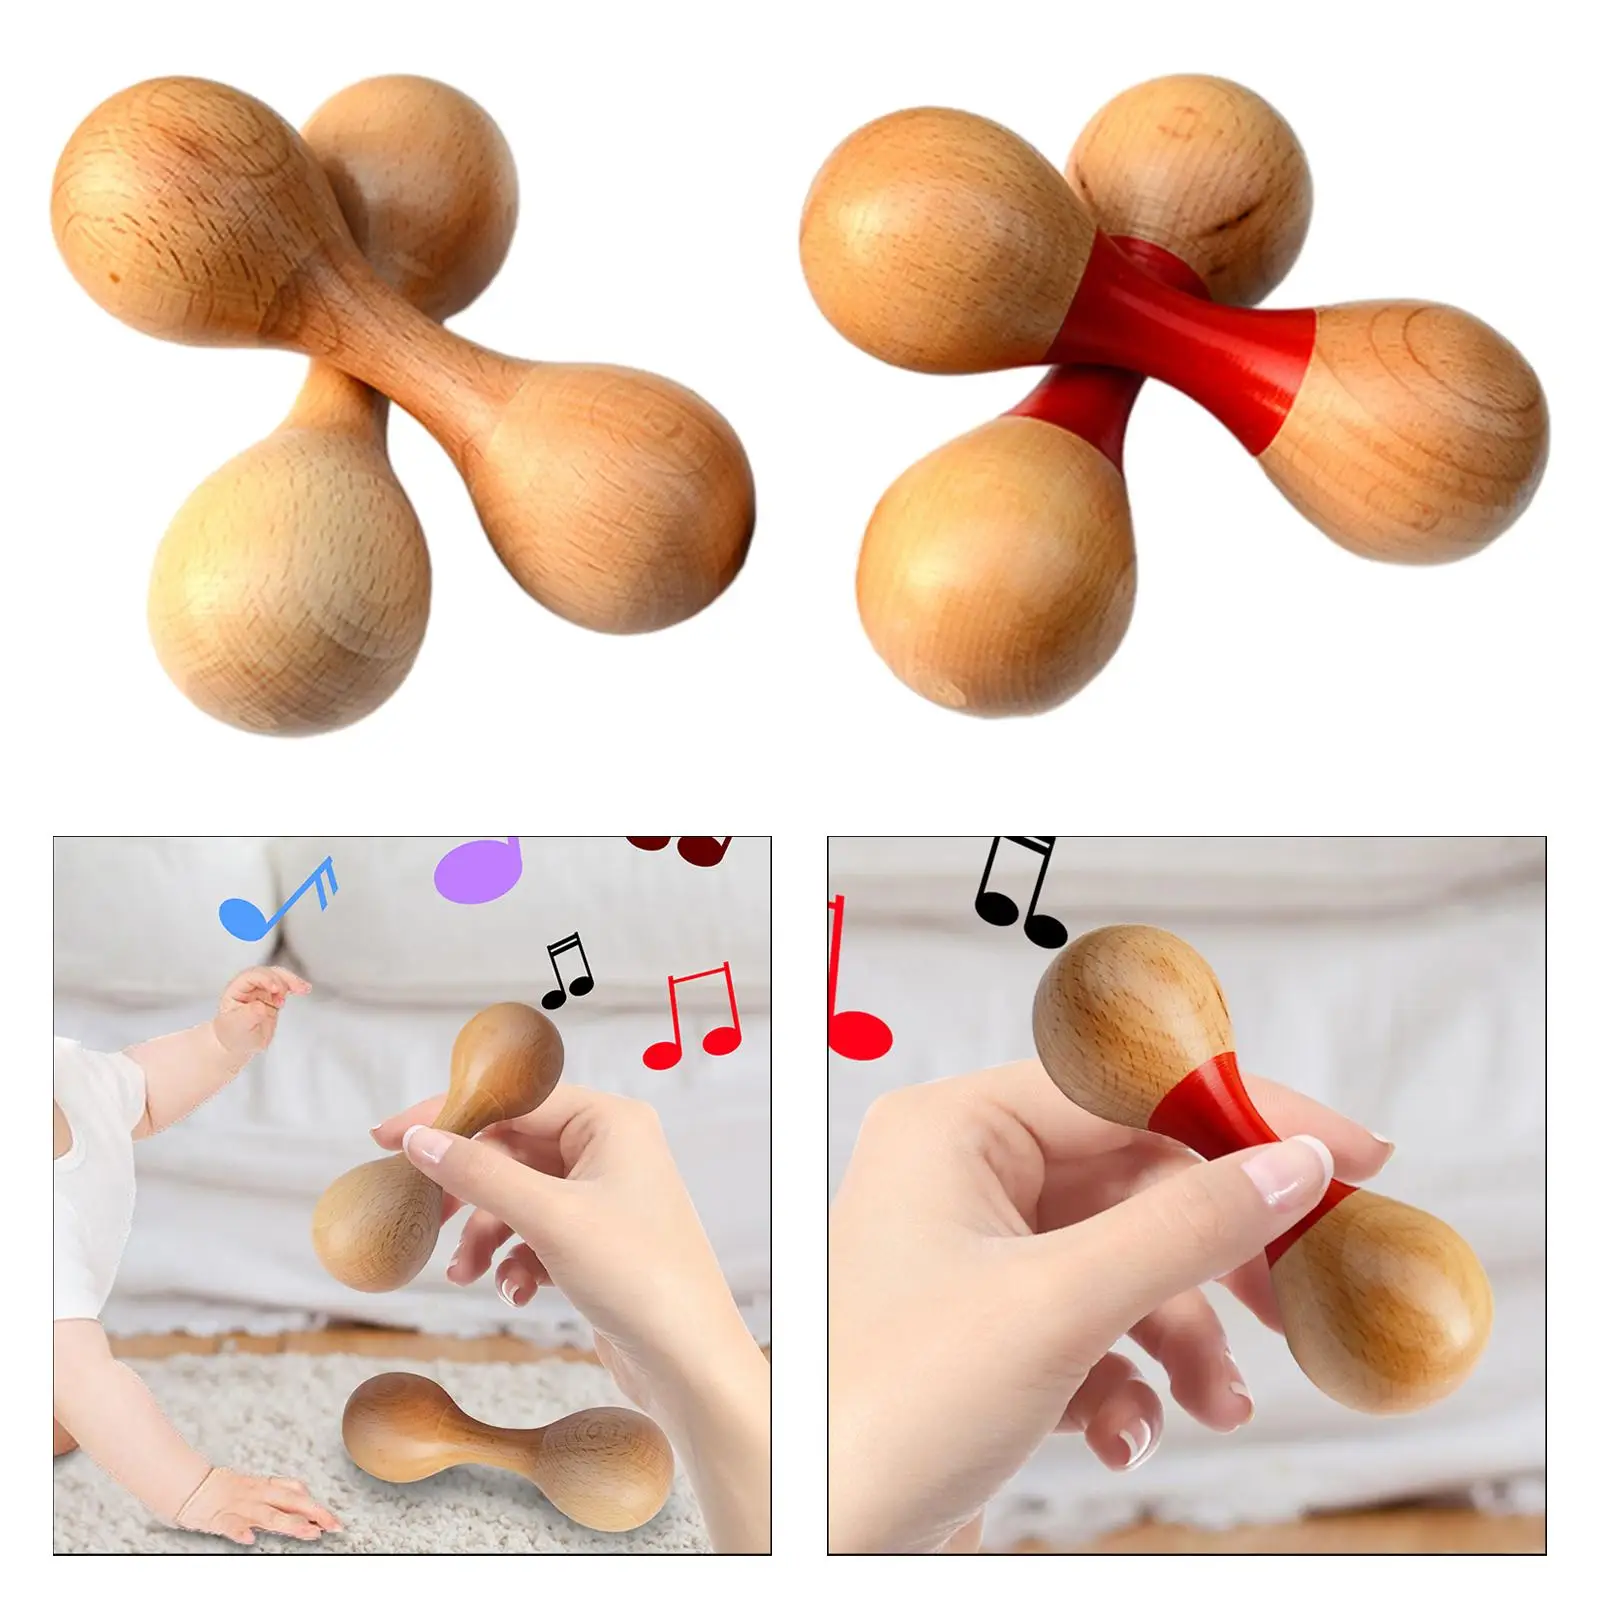 2x Sand Hammer Gifts Educational Double Head Hand Percussion Instrument Wood Portable Shaker Rattle for Children Adult